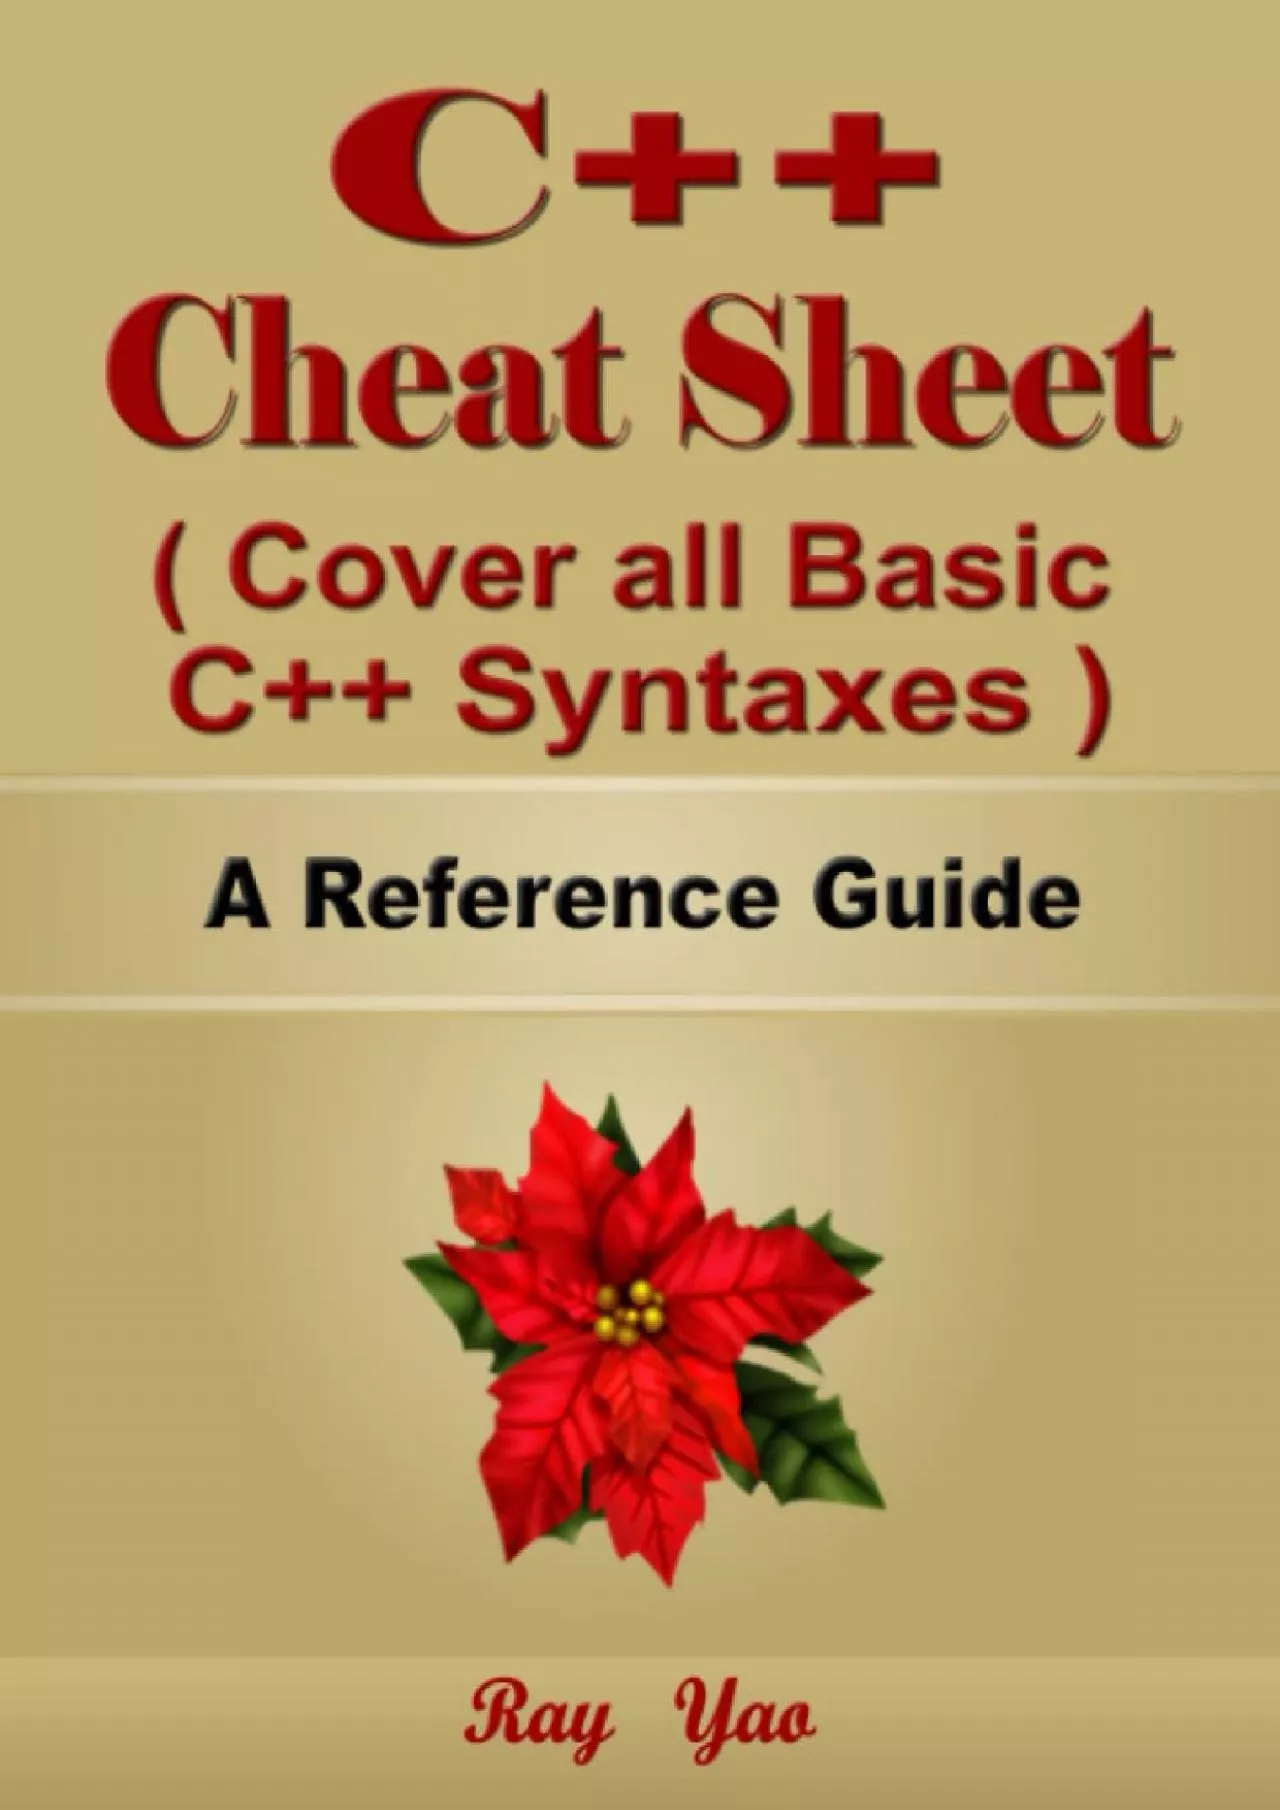 [FREE]-C++ Cheat Sheet, Cover all Basic Python Syntaxes, A Reference Guide: C++ Programming